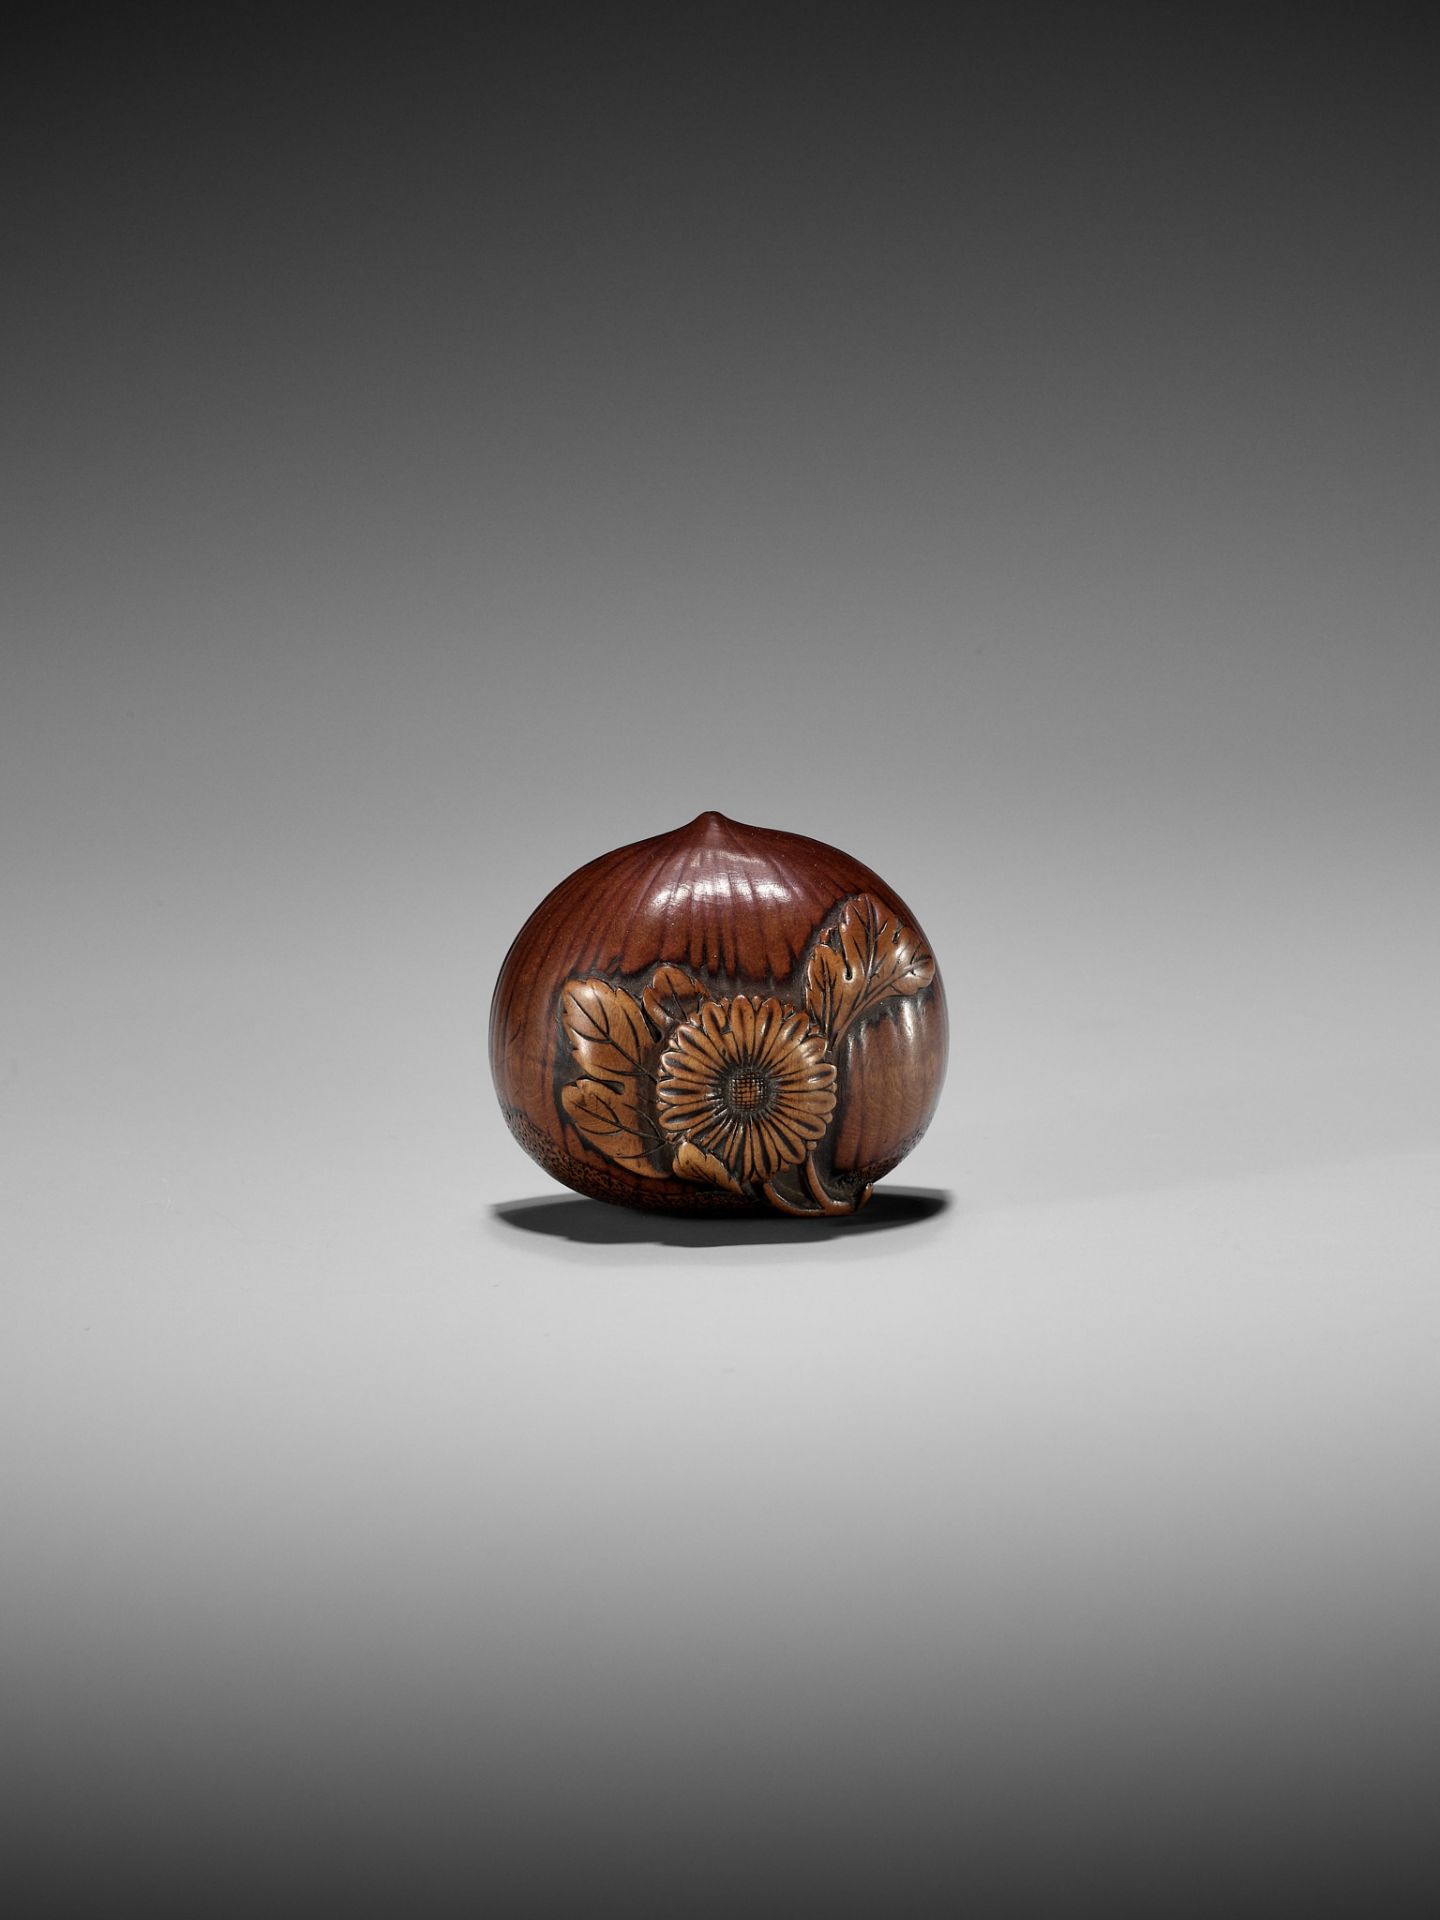 AN EARLY AUTUMNAL WOOD NETSUKE OF A CHESTNUT WITH CHRYSANTHEMUM - Image 6 of 7